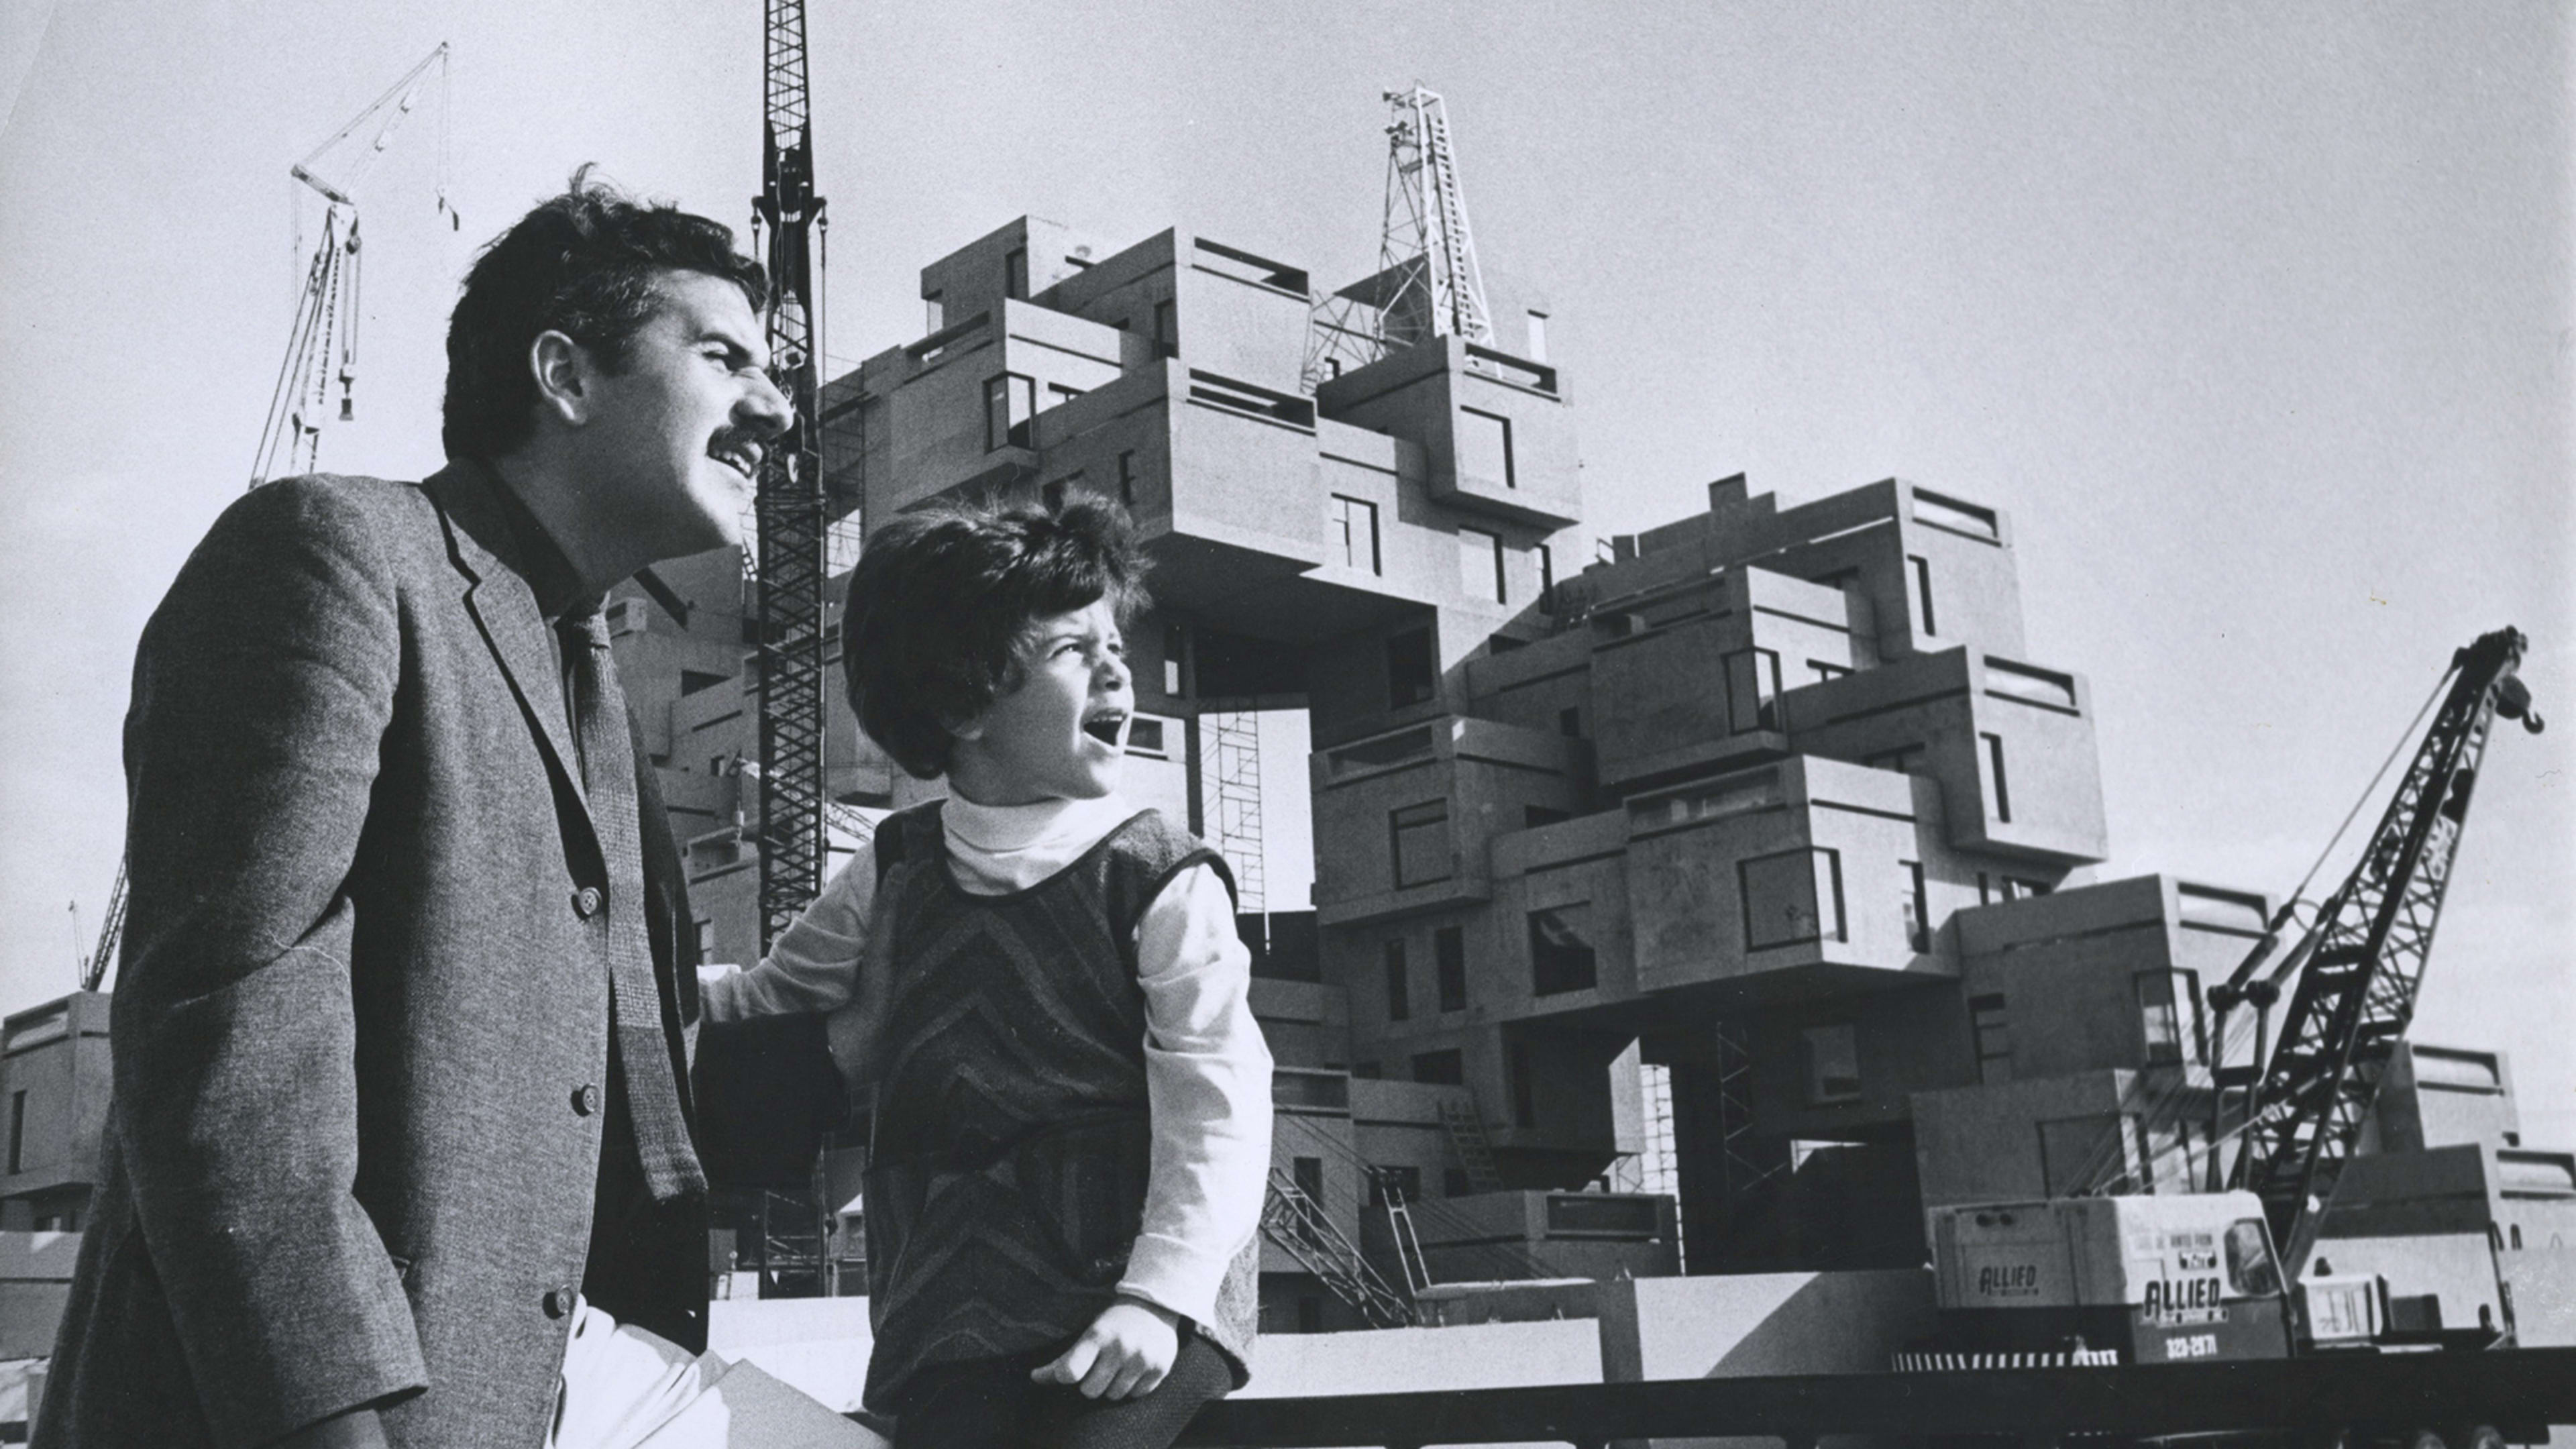 Moshe Safdie’s unrealized dream for Habitat 67 may finally be coming true